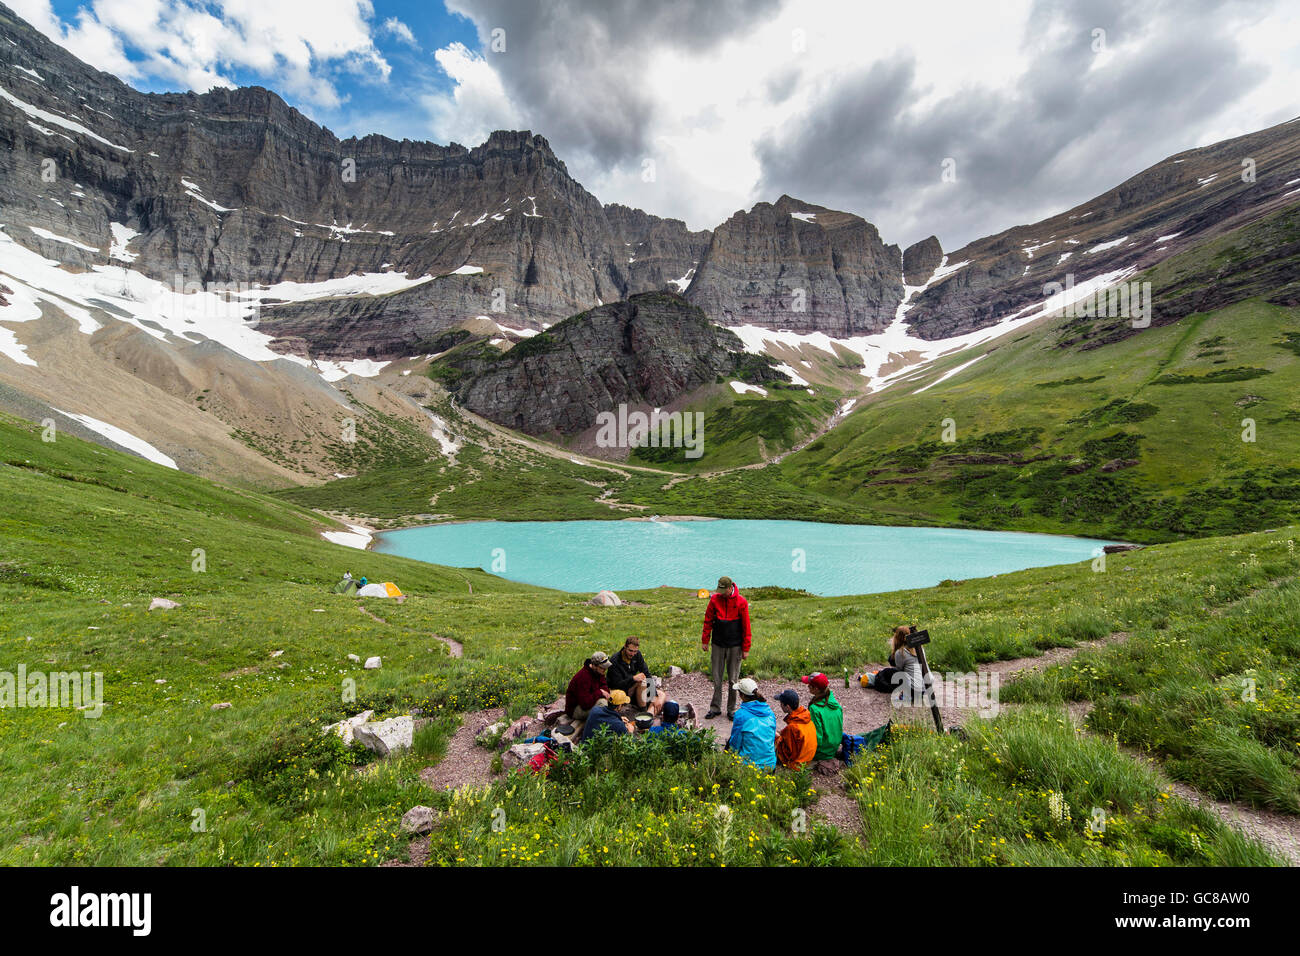 Campers along the glacial blue Cracker Lake at Glacier National Park in West Glacier, Montana. Stock Photo